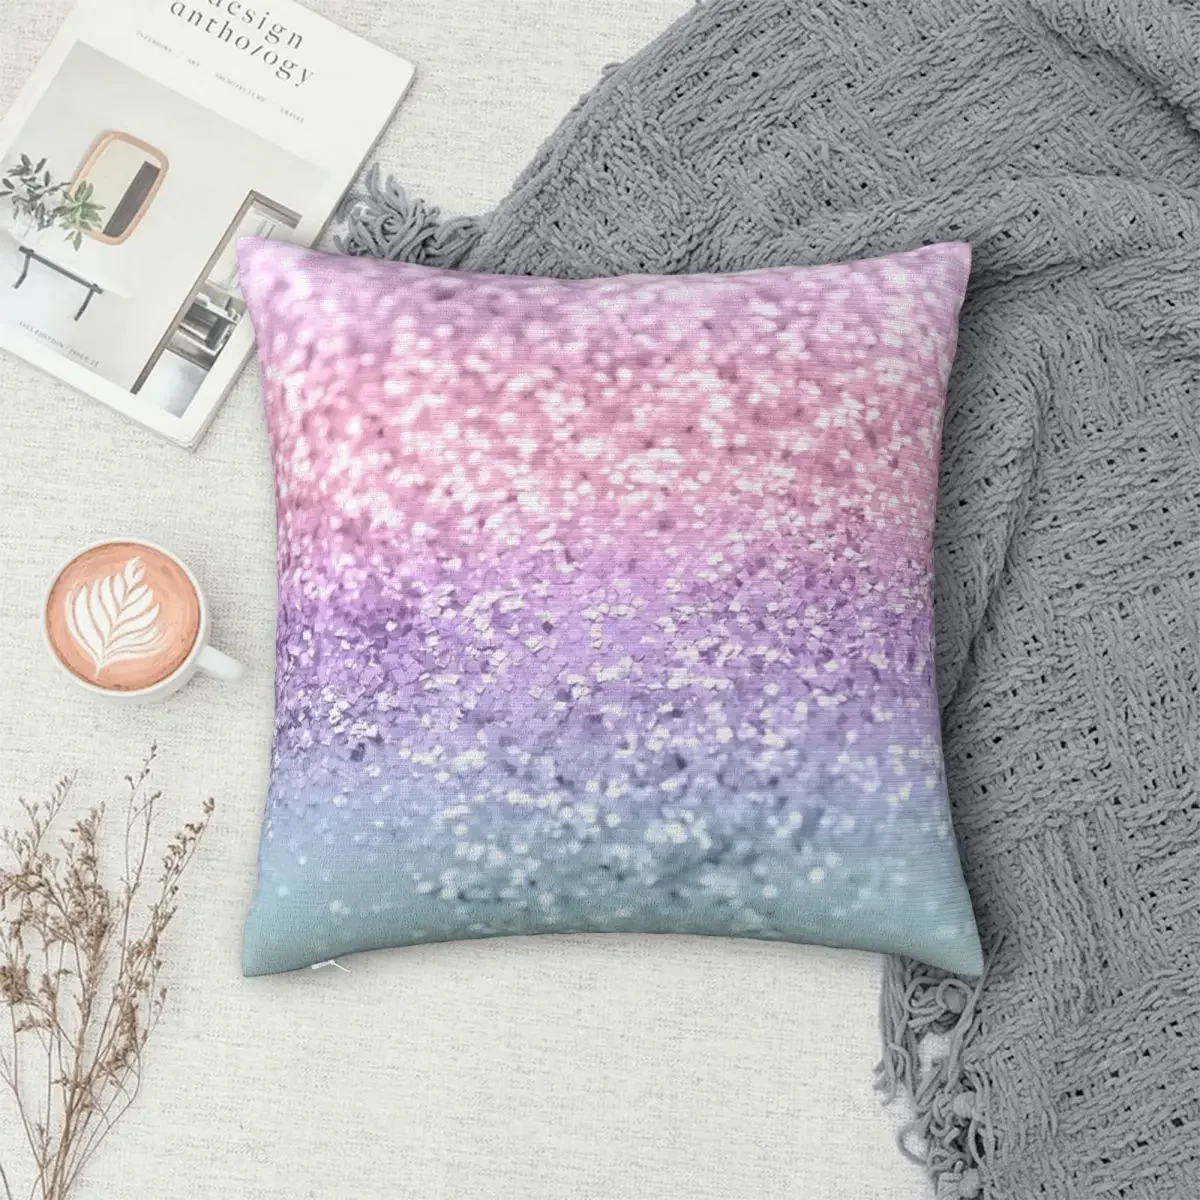 

Unicorn Girls Glitter Pillowcase Polyester Pillows Cover Cushion Comfort Throw Pillow Sofa Decorative Cushions Used for Home